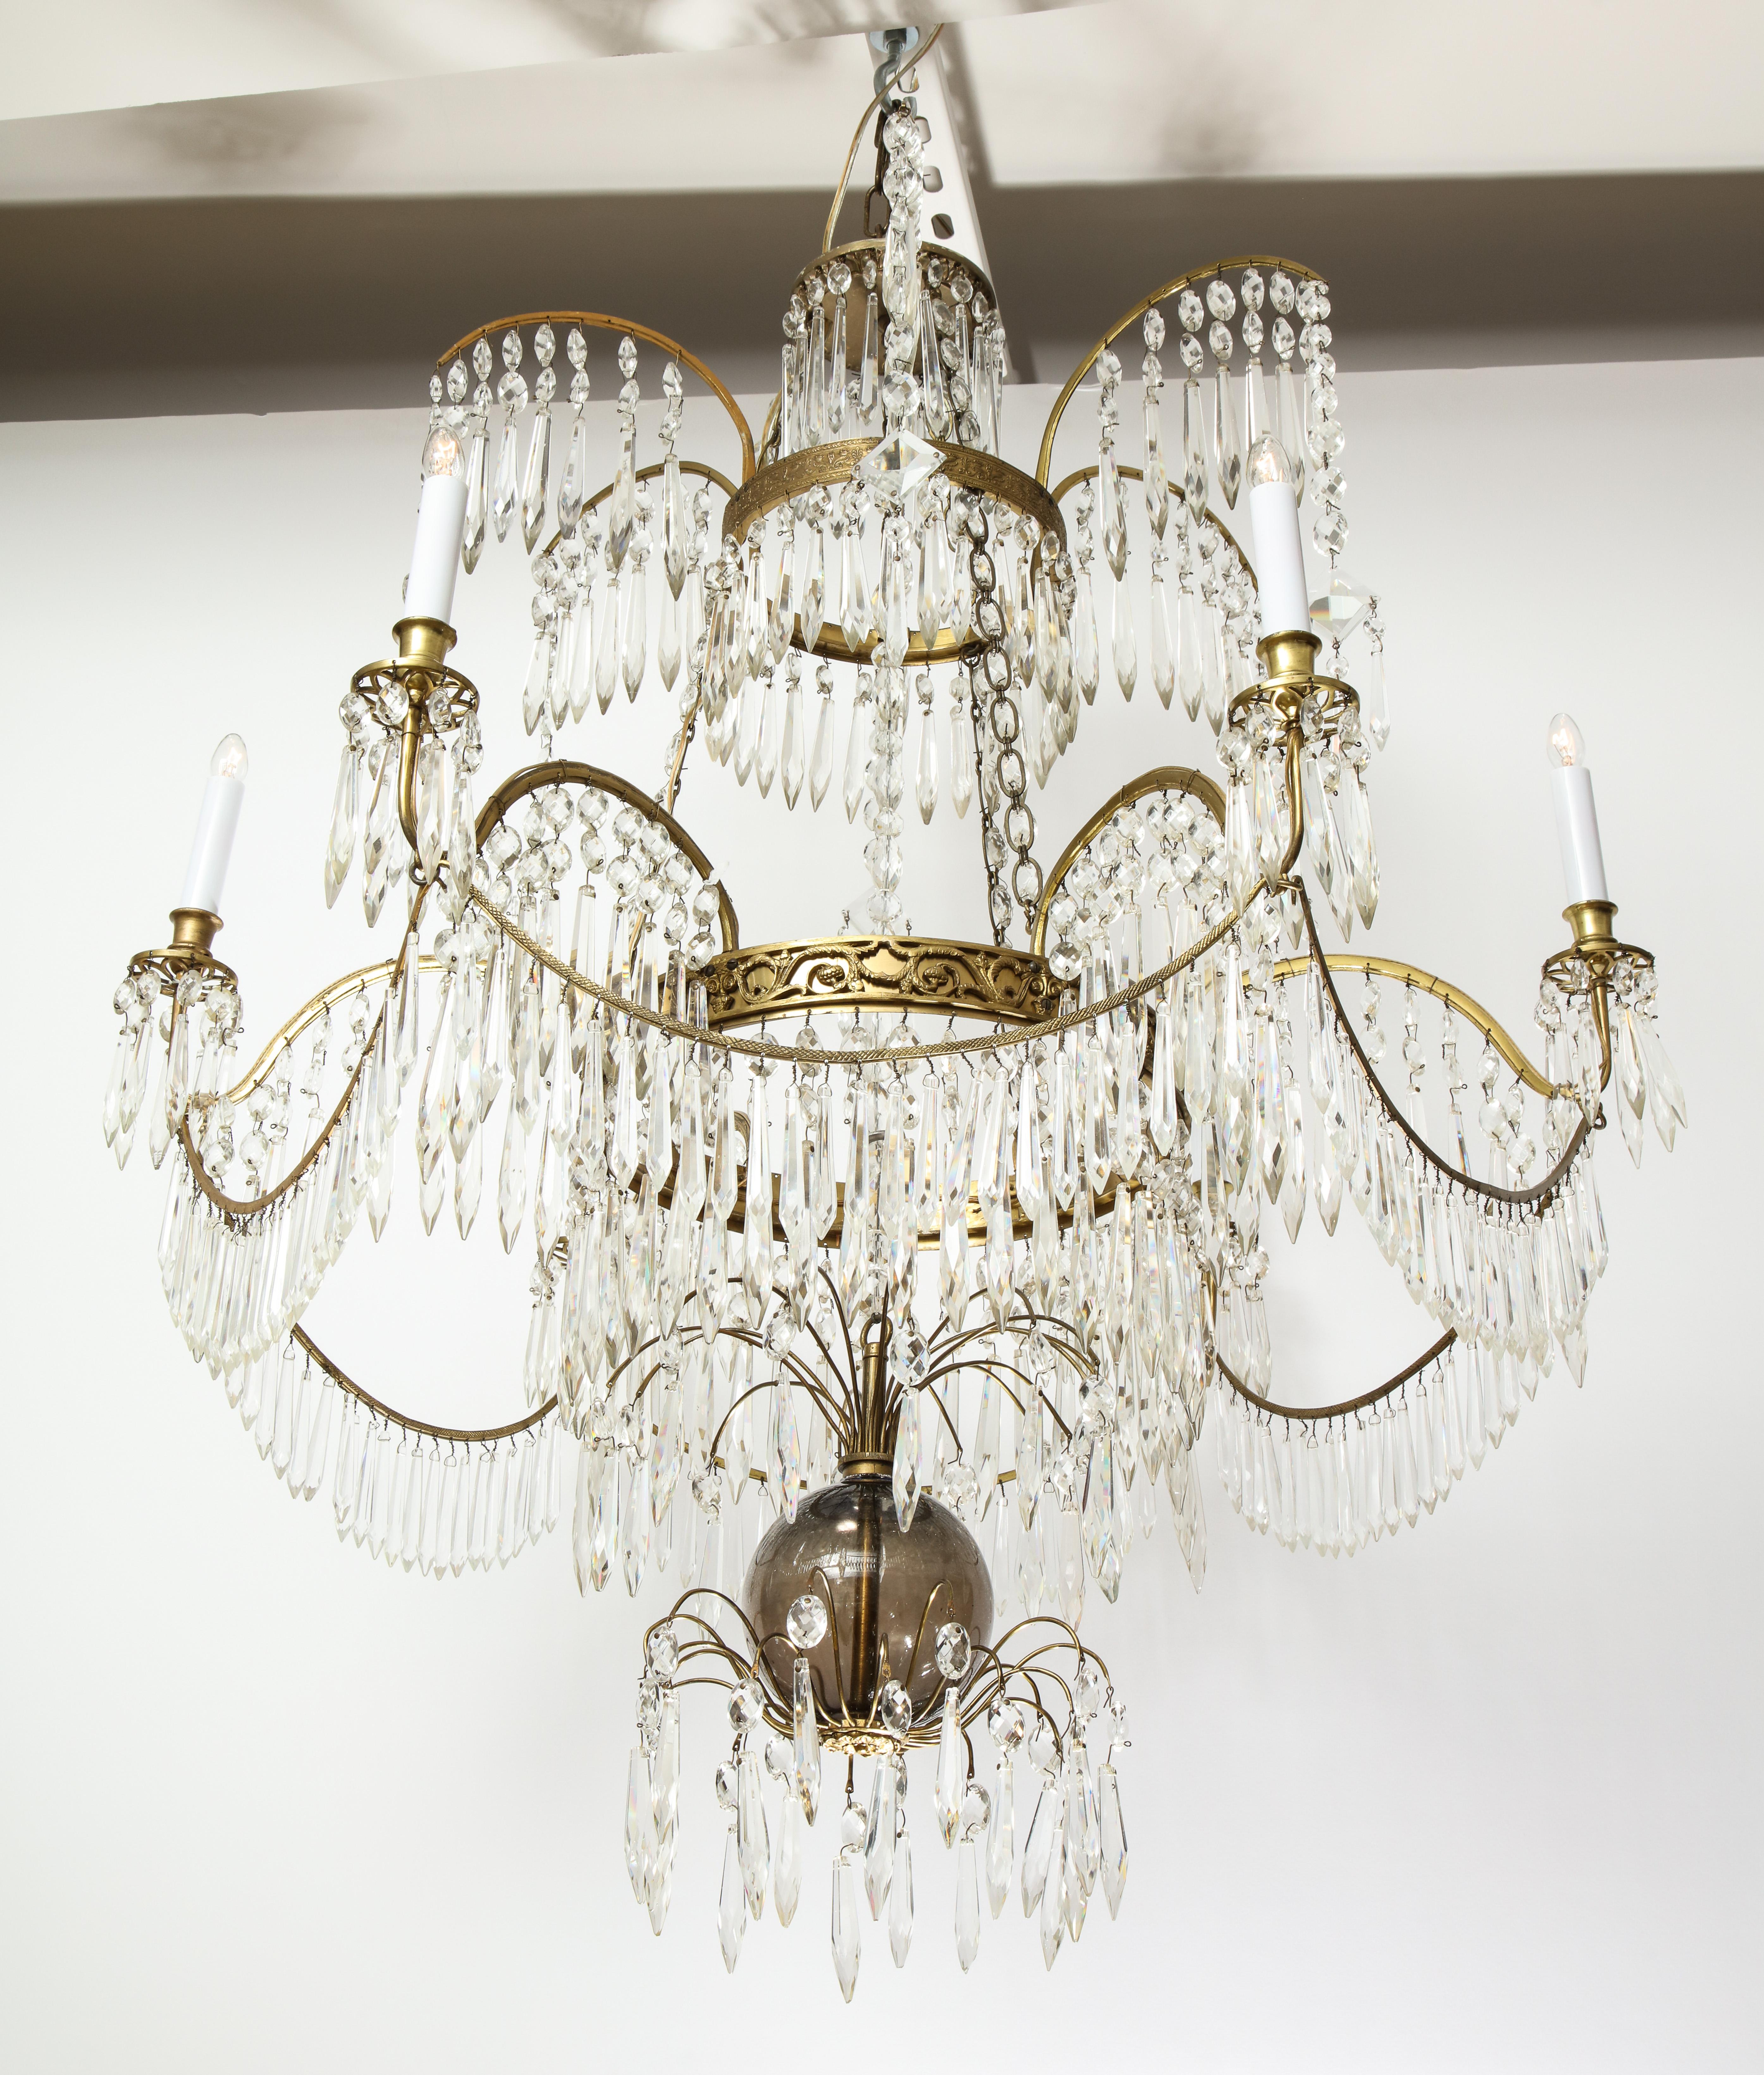 Having a central glass pendant hung by a crystal chain and surrounded by crystal drops, the upper tier having six arms hung with cascading crystal drops, the lower tier having six 